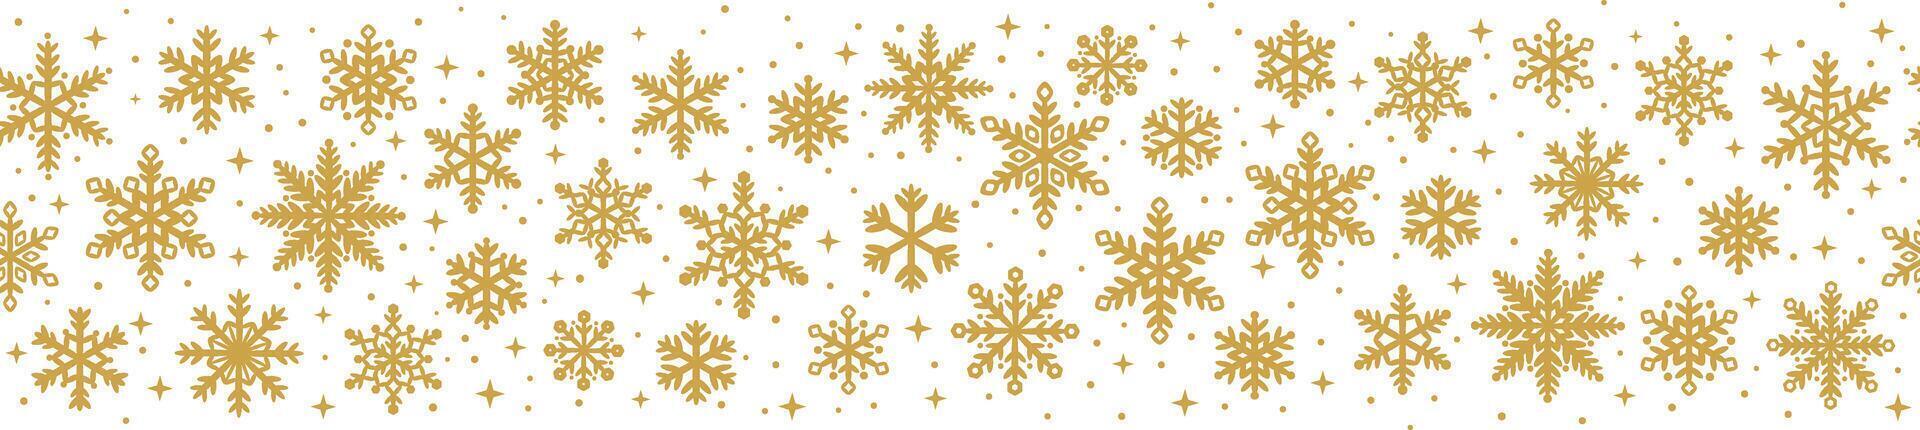 Gold snowflake banner, elegant vector border, seamless repeating pattern for the winter holiday celebrations, isolated clip art element design